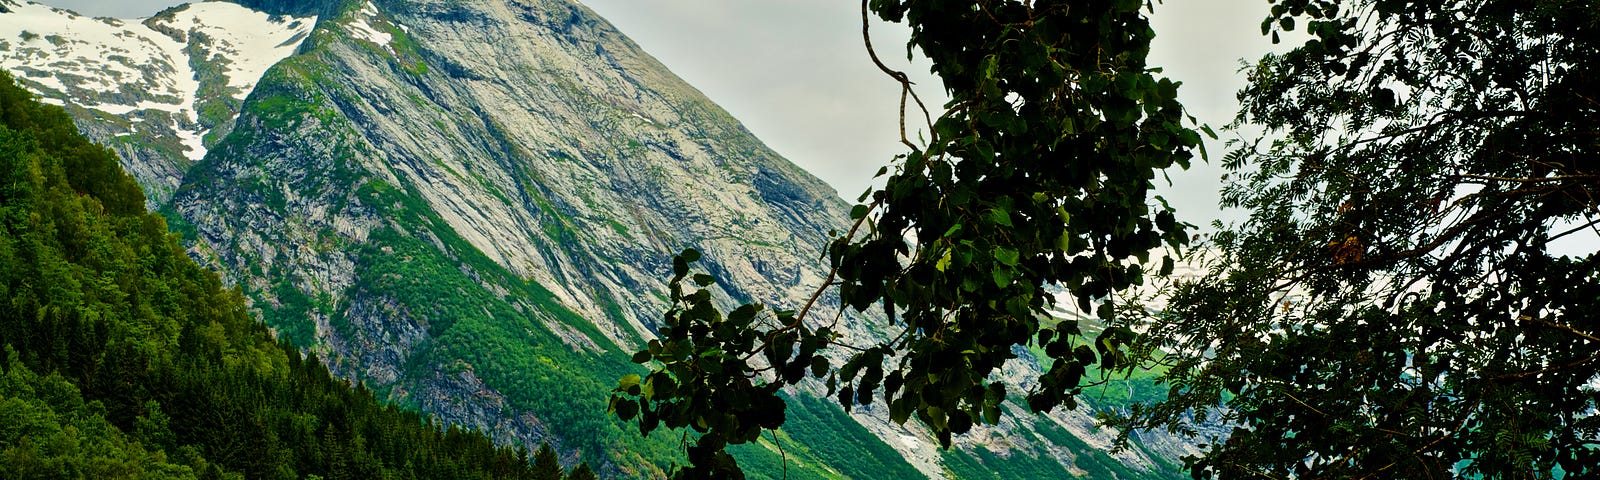 Image of a tall, rock-faced mountain in Norway